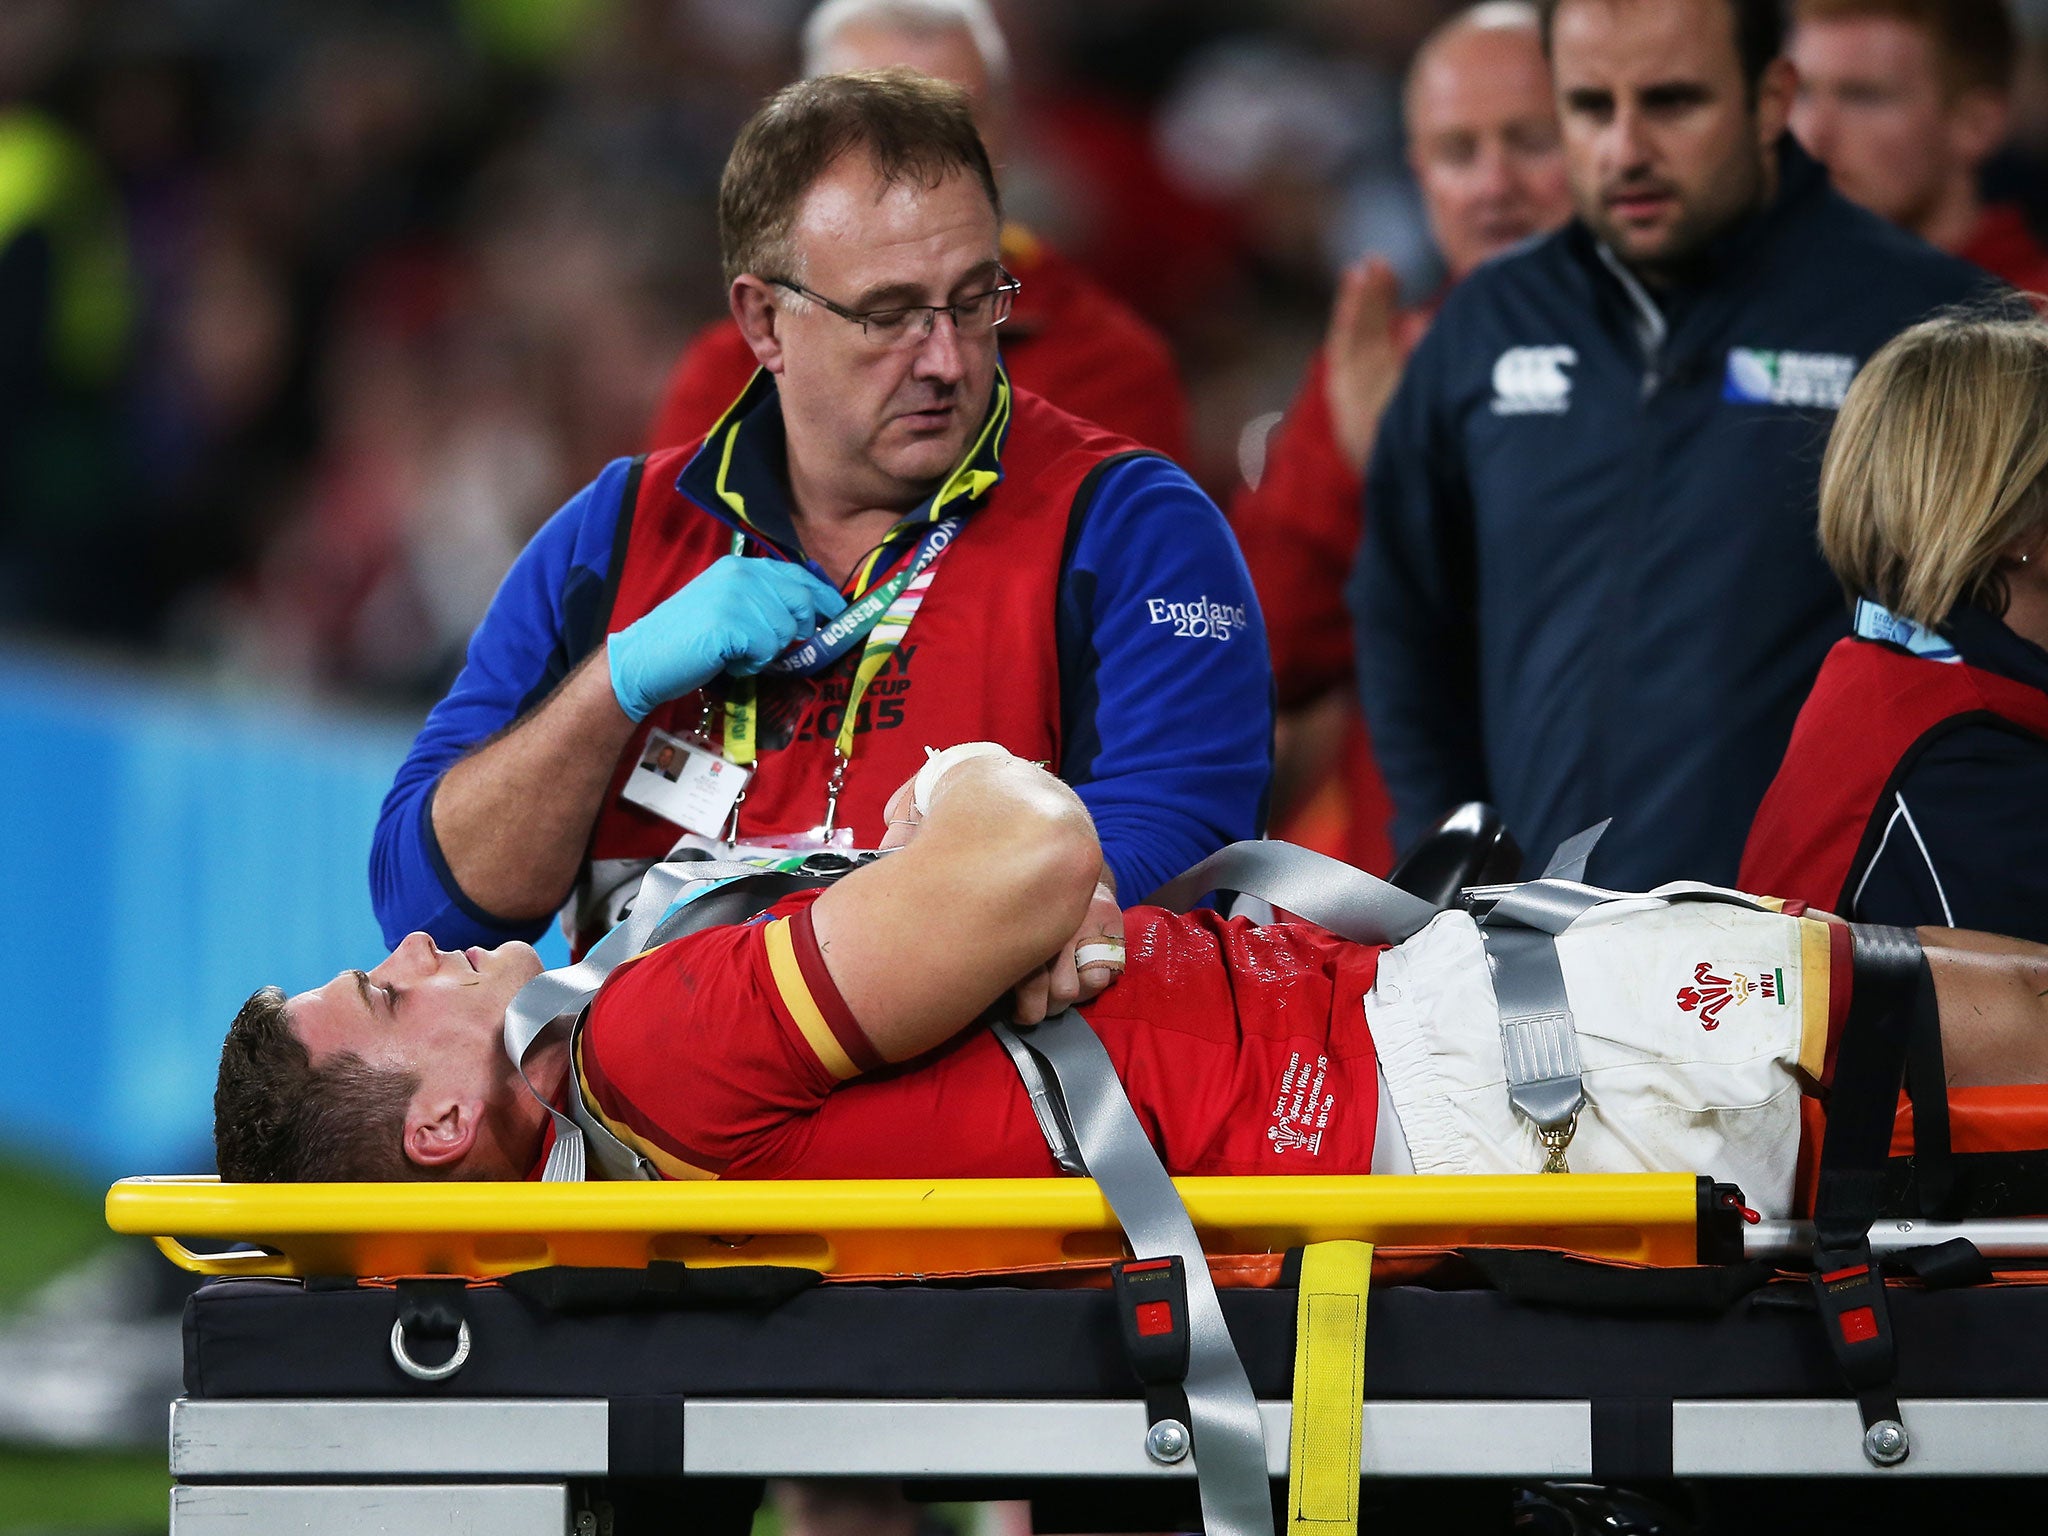 Scott Williams has been ruled out of the Rugby World Cup